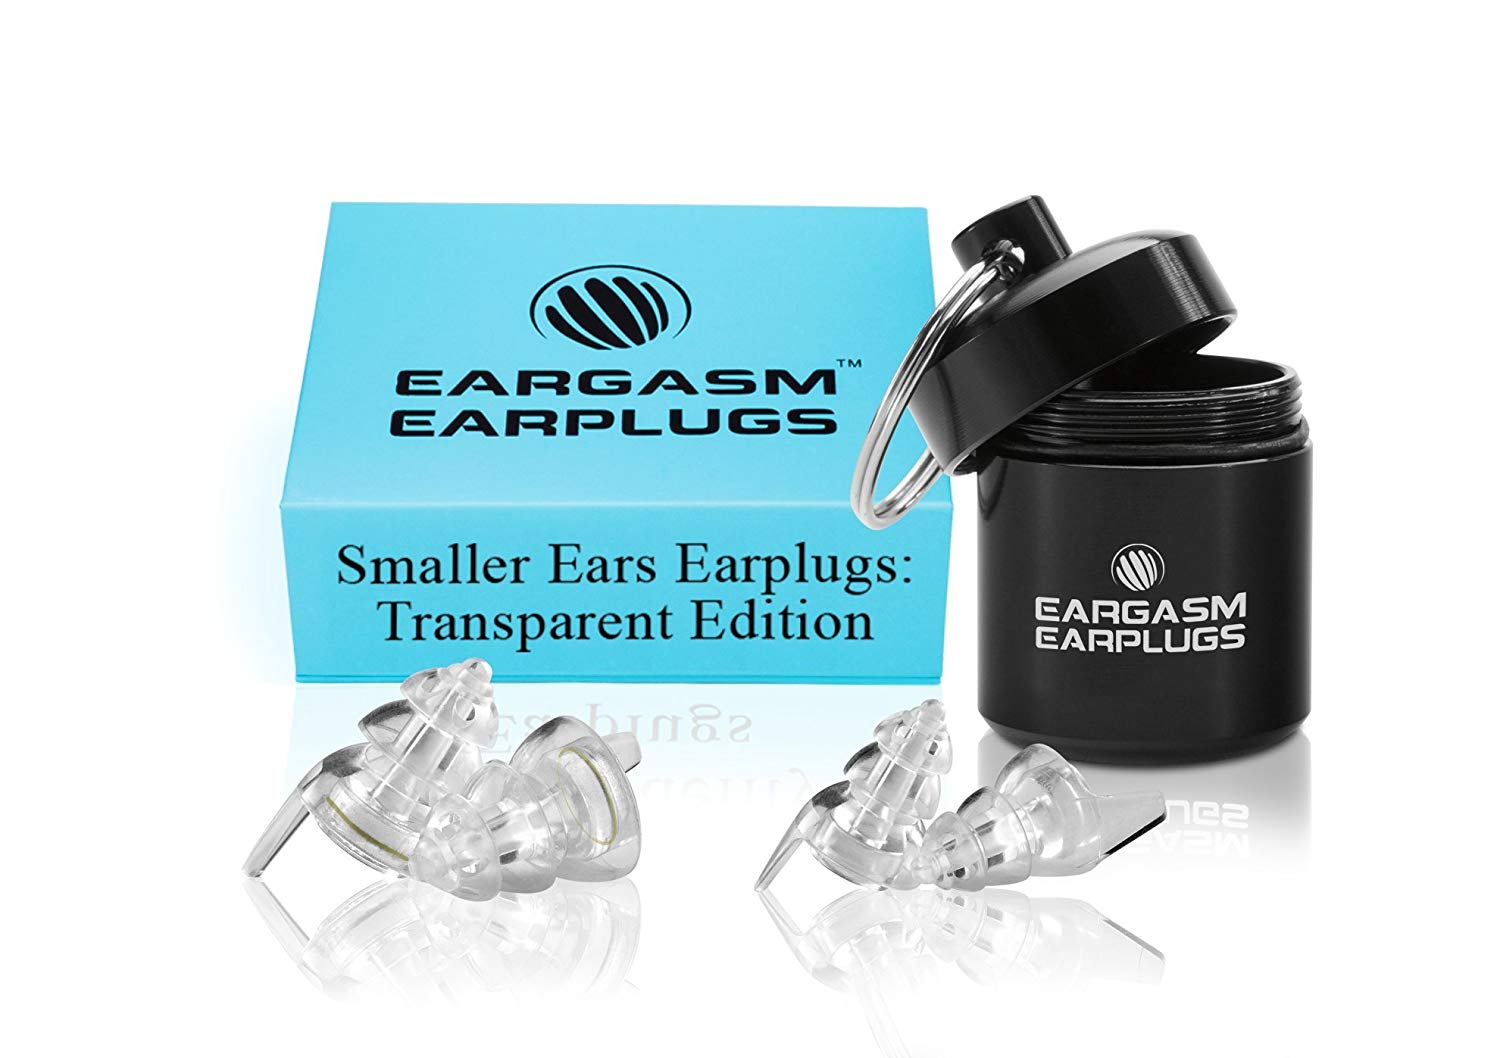 Eargasm Smaller Ears Earplugs For Concerts Musicians Motorcycles Noise Sensitivity Disorders And More! Two Different Sizes Included To Accommodate Sma